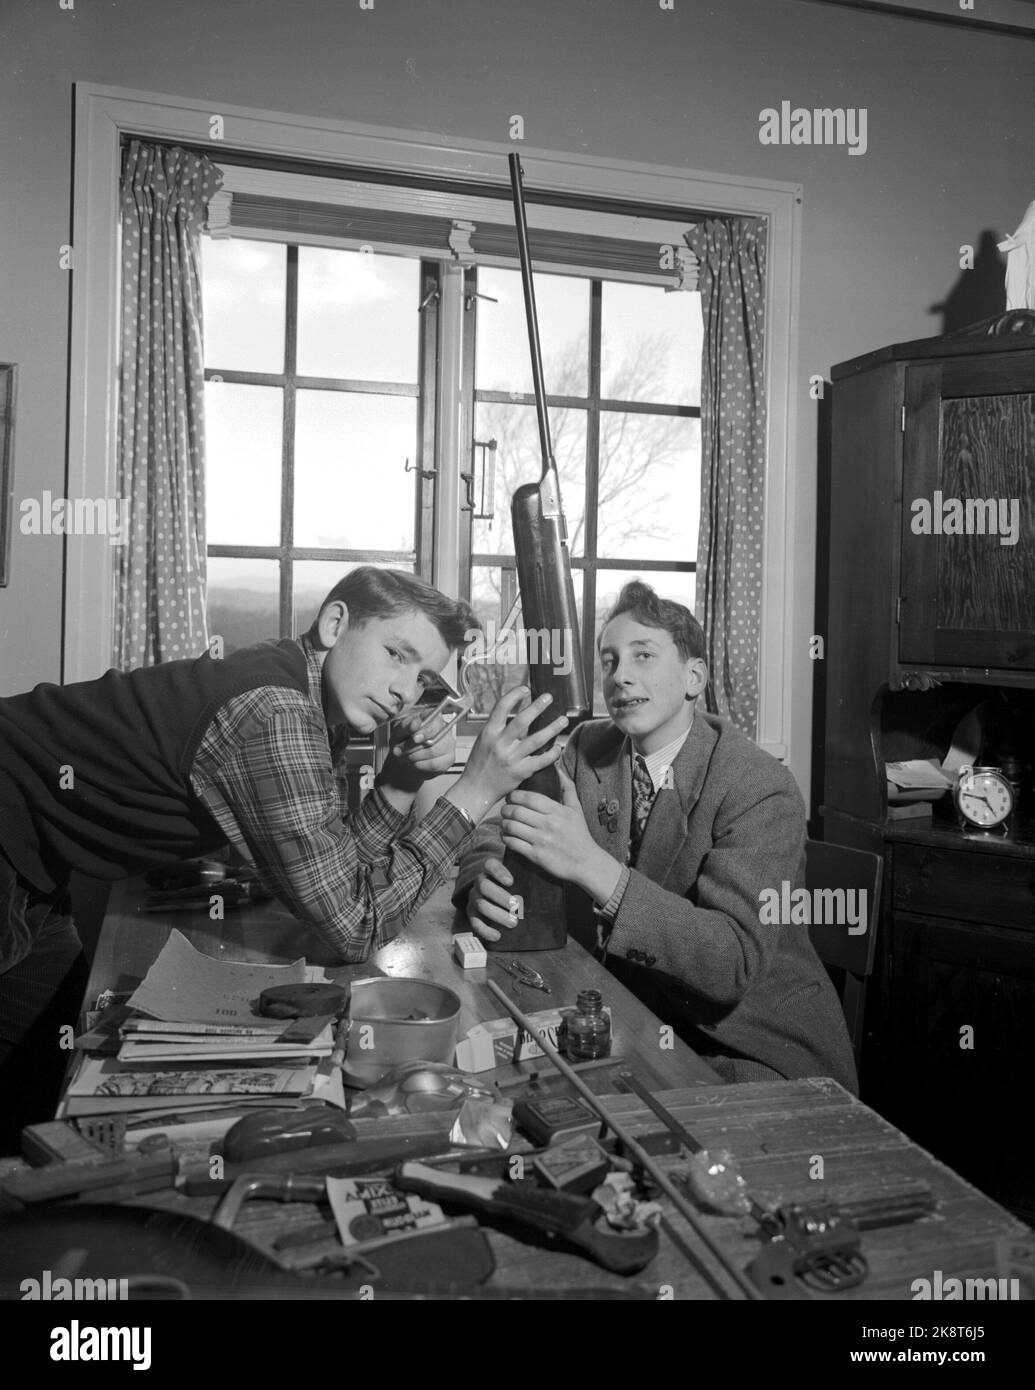 19530606. Composer Harald Sæverud's sons Ketil Sæverud (13 years) and Tormod Sæverud (15 years) brush their air rifle at home on Siljustøl. Brother Sveinung (17 years) was not present when the picture was taken. Brothers. Photo: Sverre A. Børretzen / Current / NTB Stock Photo